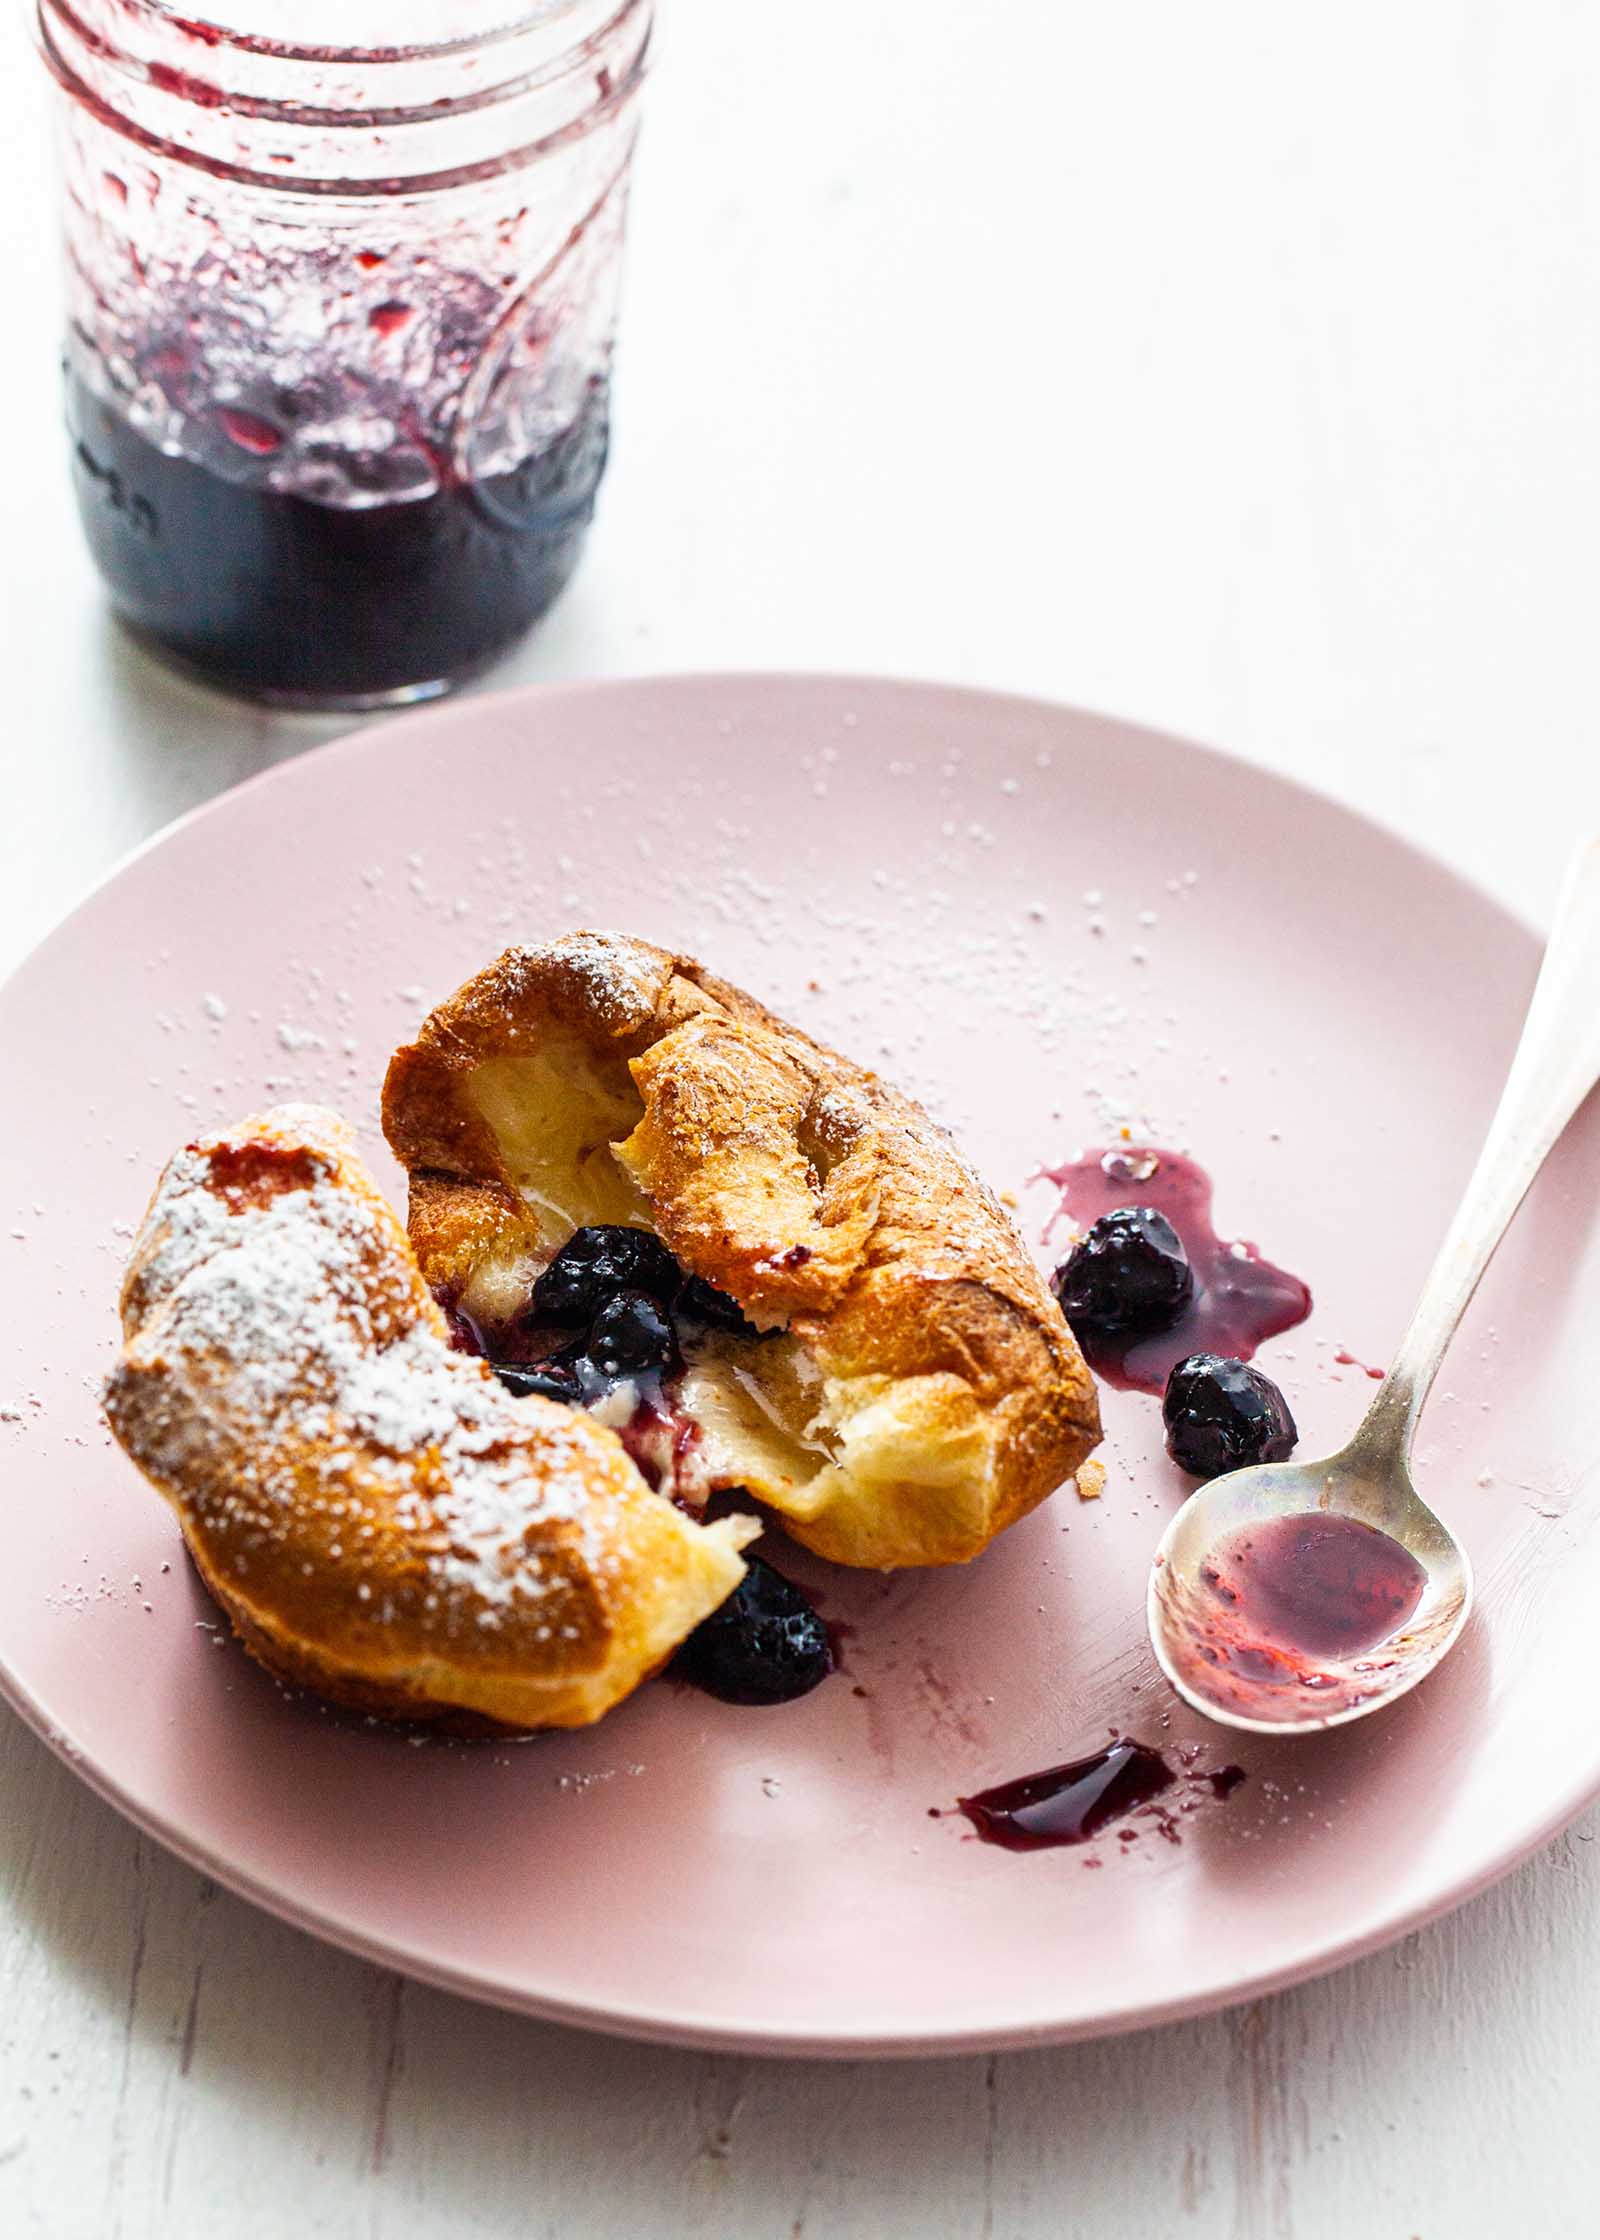 A popover split in half and spread with butter and jam.